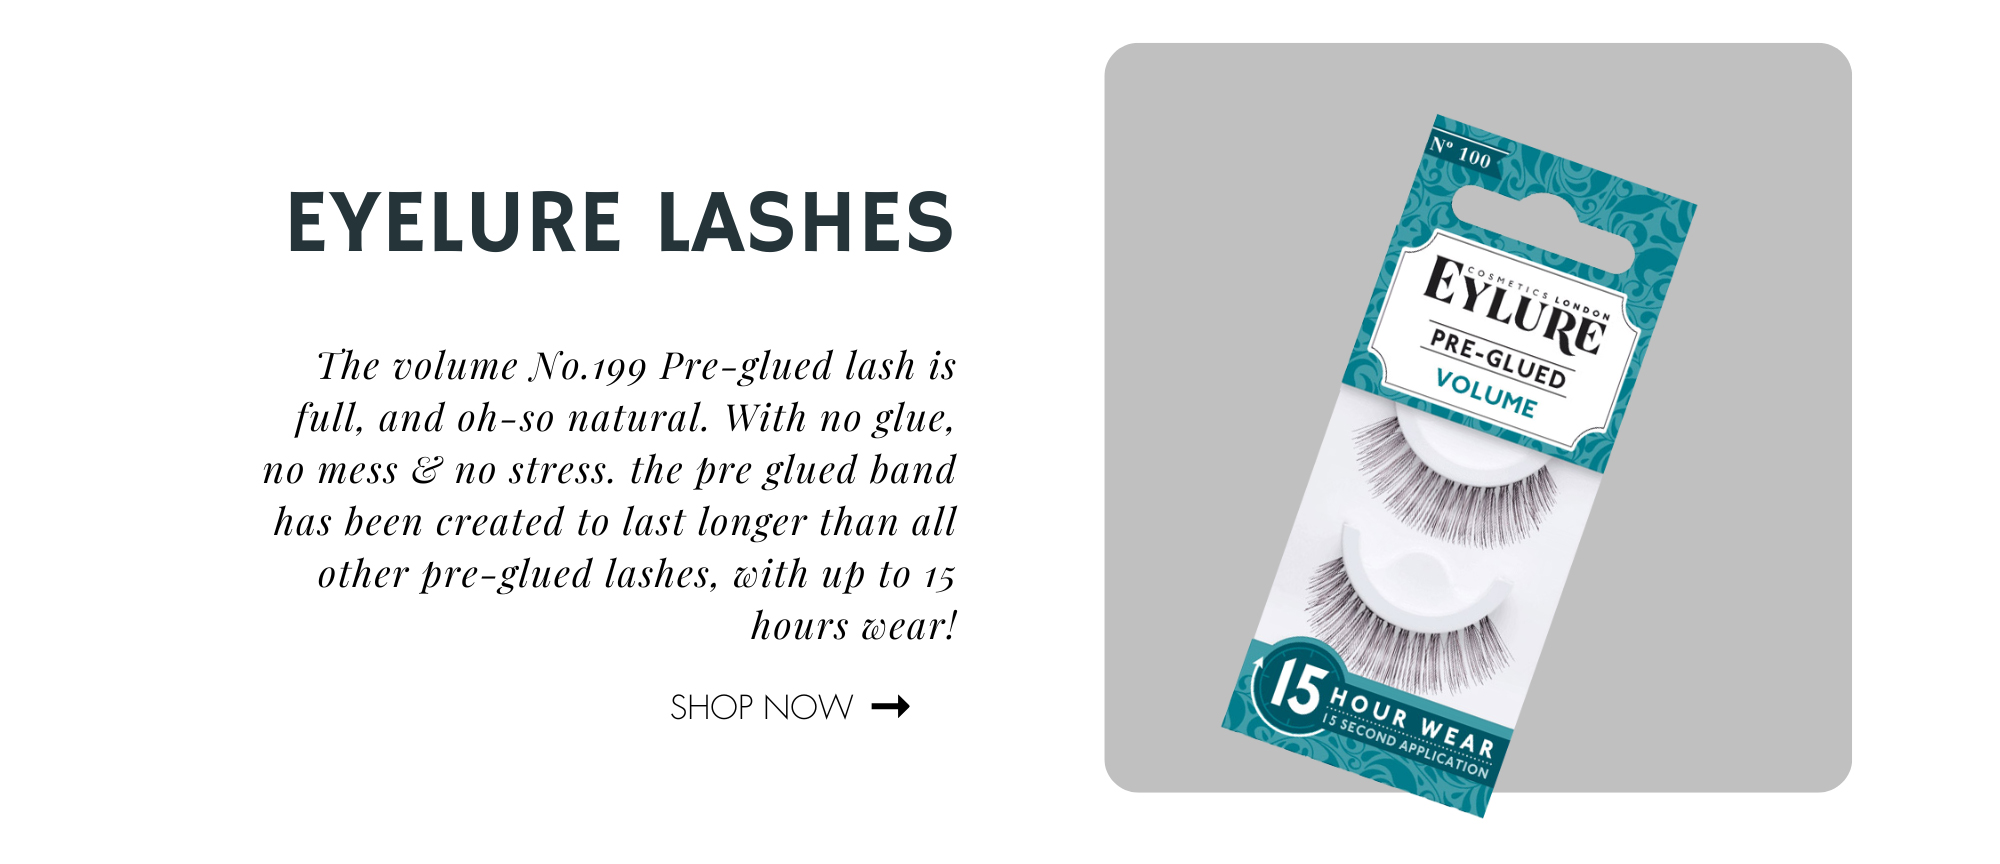 The volume No.199 Pre-glued lash is full, and oh-so natural. With no glue, no mess & no stress. the pre glued band has been created to last longer than all other pre-glued lashes, with up to 15 hours wear!